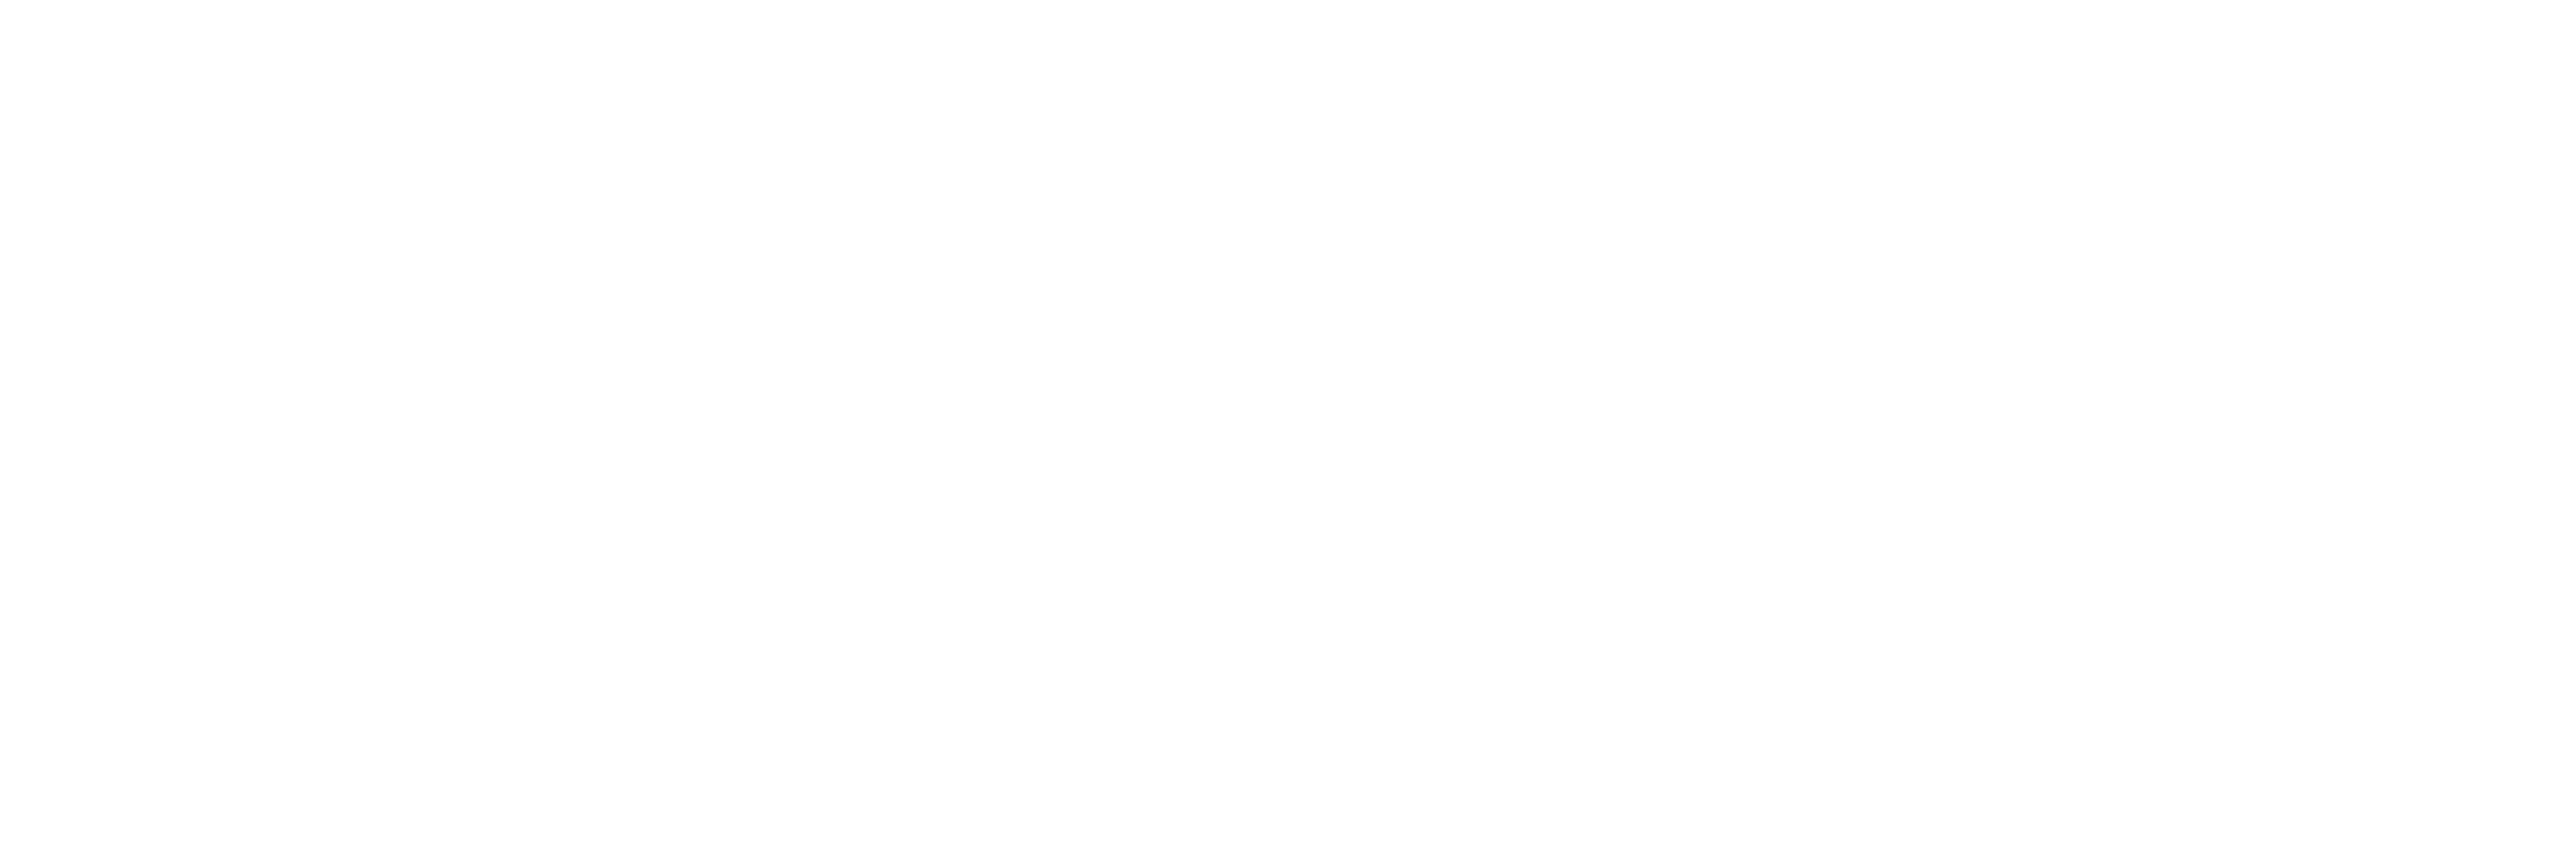 Individual Placement and Support  (IPS) Employment Service - South West London white logo